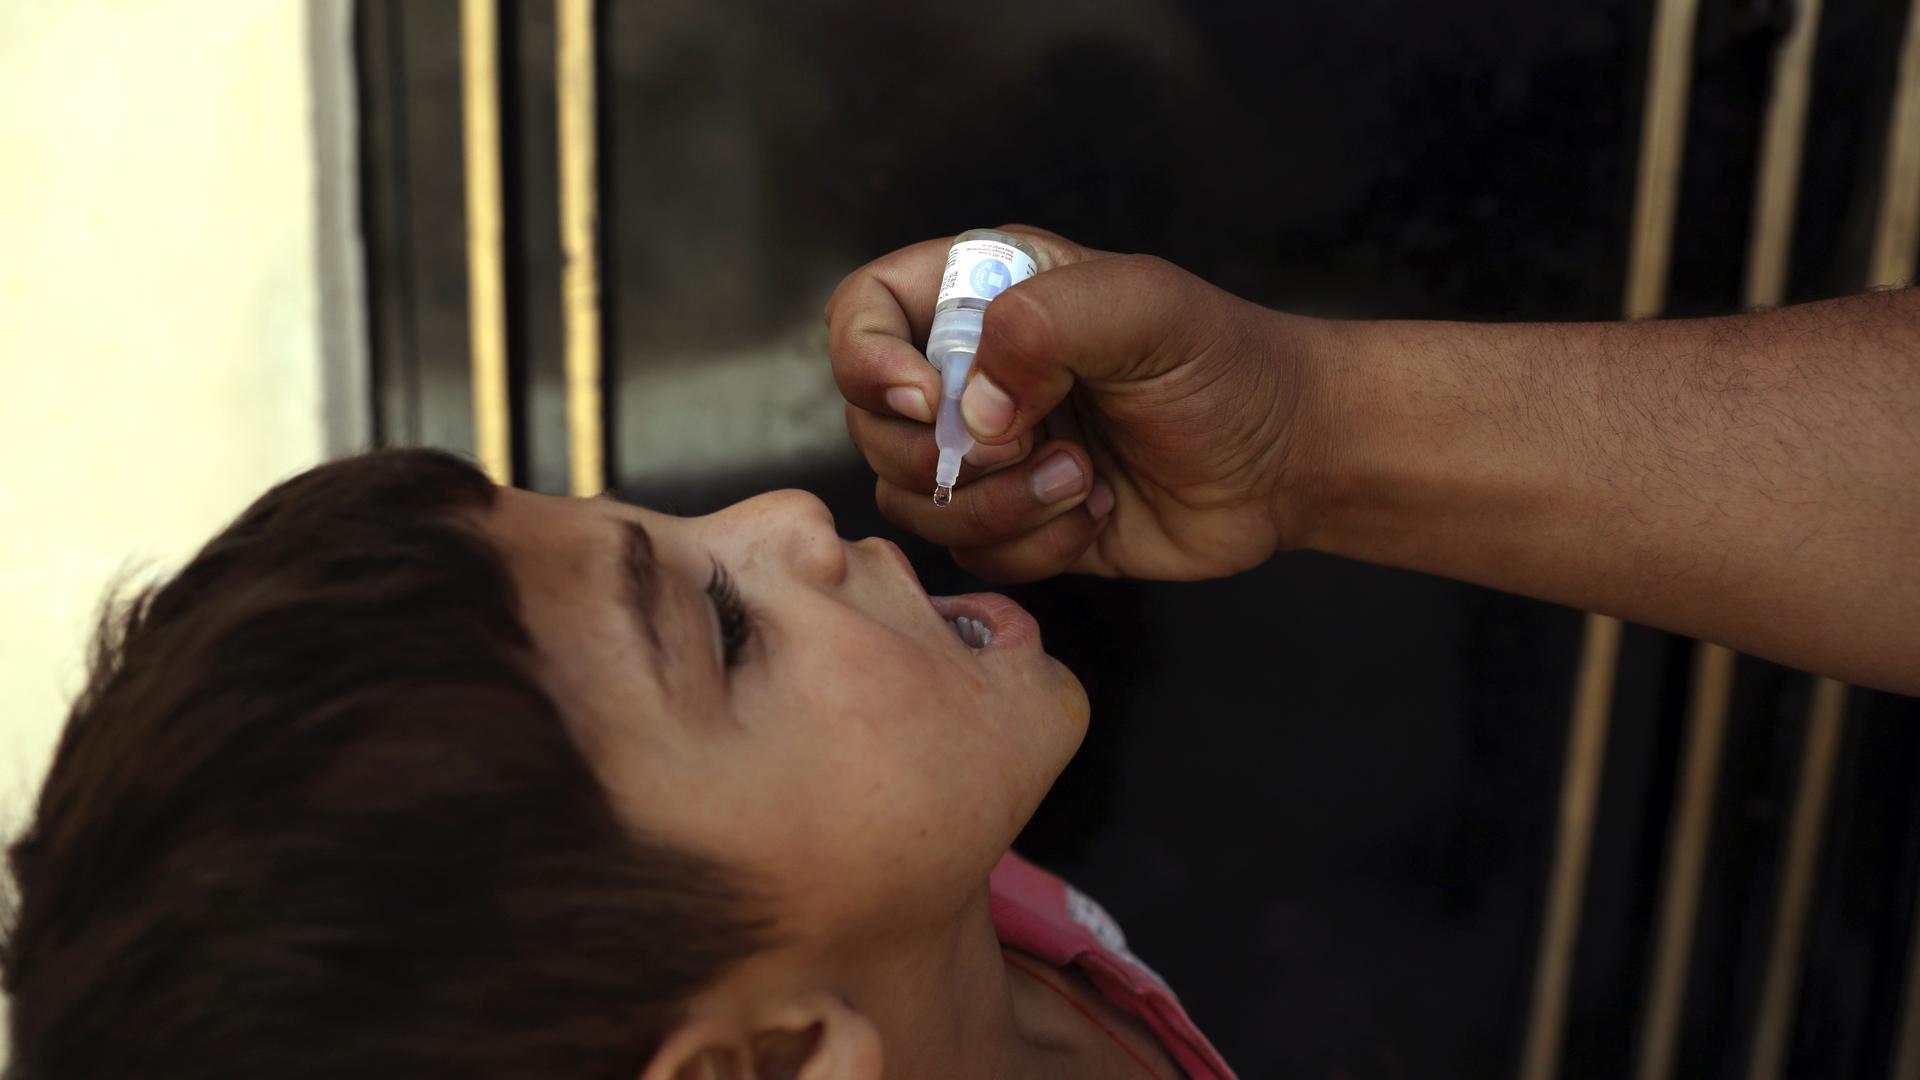 A health worker administers a vaccination to a child during a polio campaign in the old part of Kabul, Afghanistan, June 15, 2021. UN agencies are gearing up to vaccinate all of Afghanistan’s children under 5 against polio after the Taliban agreed to the 